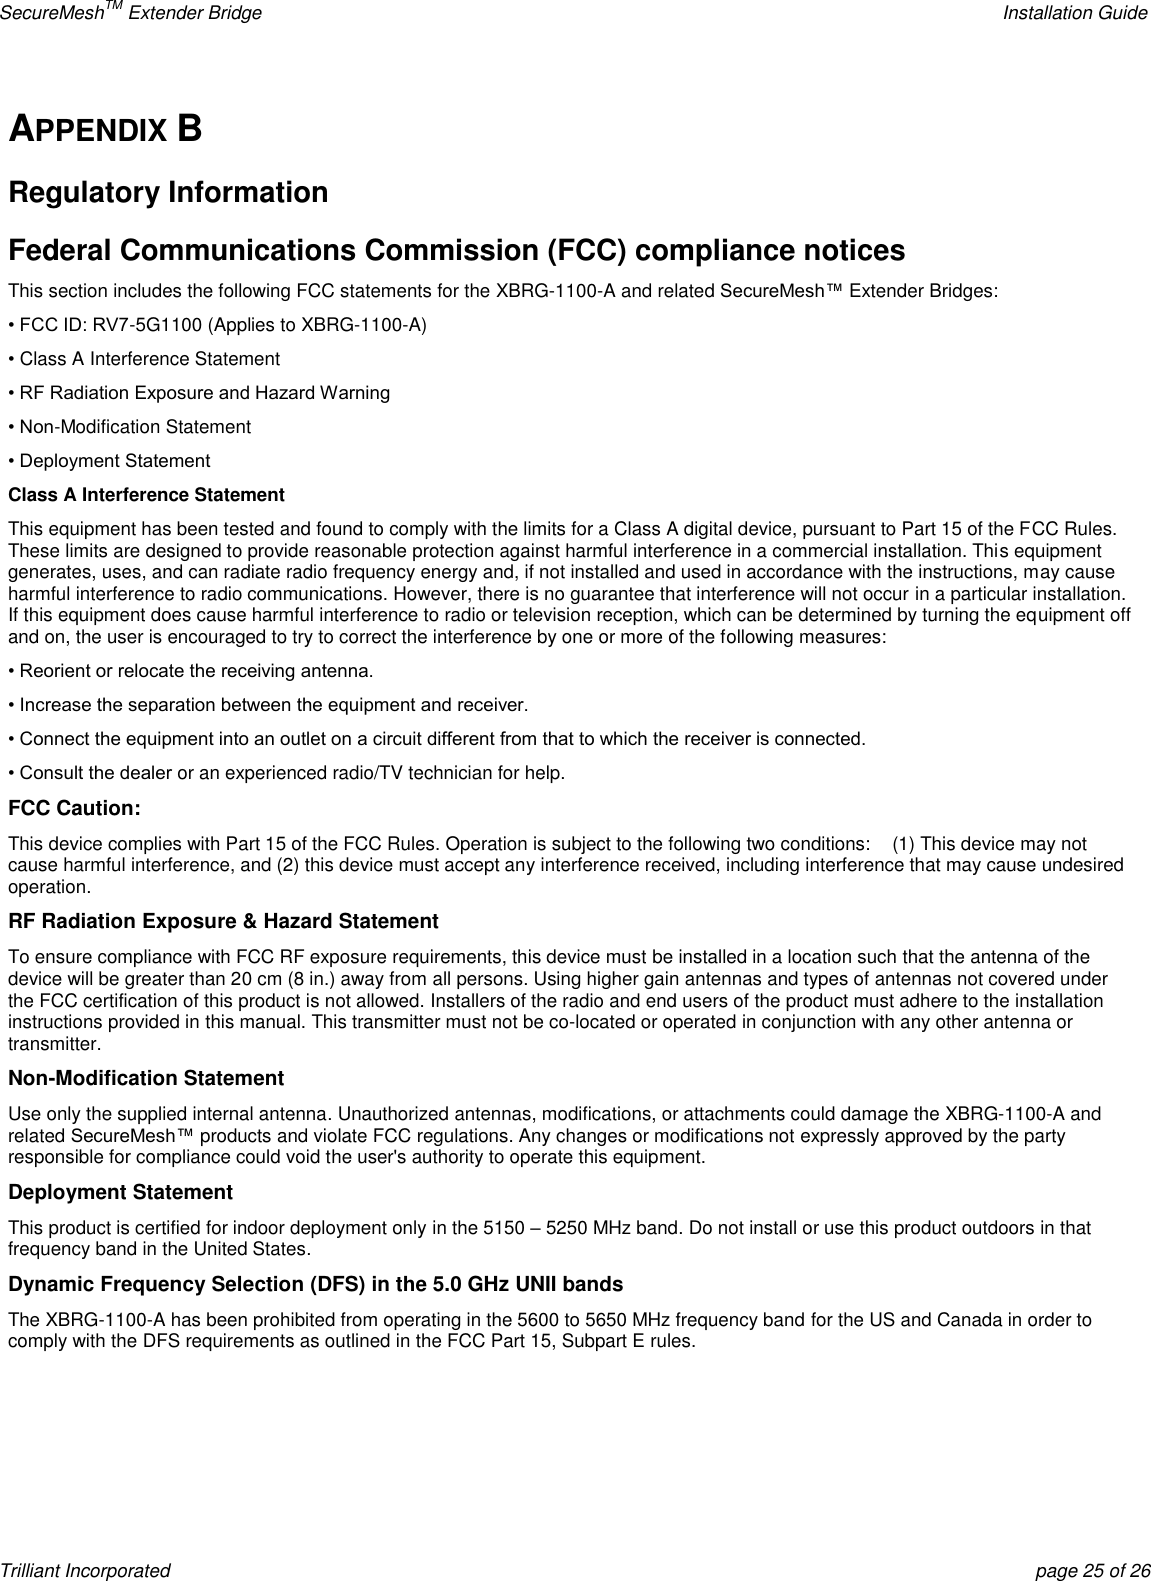 SecureMeshTM Extender Bridge    Installation Guide Trilliant Incorporated  page 25 of 26 APPENDIX B Regulatory Information Federal Communications Commission (FCC) compliance notices This section includes the following FCC statements for the XBRG-1100-A and related SecureMesh™ Extender Bridges: • FCC ID: RV7-5G1100 (Applies to XBRG-1100-A) • Class A Interference Statement • RF Radiation Exposure and Hazard Warning • Non-Modification Statement • Deployment Statement Class A Interference Statement This equipment has been tested and found to comply with the limits for a Class A digital device, pursuant to Part 15 of the FCC Rules. These limits are designed to provide reasonable protection against harmful interference in a commercial installation. This equipment generates, uses, and can radiate radio frequency energy and, if not installed and used in accordance with the instructions, may cause harmful interference to radio communications. However, there is no guarantee that interference will not occur in a particular installation. If this equipment does cause harmful interference to radio or television reception, which can be determined by turning the equipment off and on, the user is encouraged to try to correct the interference by one or more of the following measures: • Reorient or relocate the receiving antenna. • Increase the separation between the equipment and receiver. • Connect the equipment into an outlet on a circuit different from that to which the receiver is connected. • Consult the dealer or an experienced radio/TV technician for help. FCC Caution: This device complies with Part 15 of the FCC Rules. Operation is subject to the following two conditions:    (1) This device may not cause harmful interference, and (2) this device must accept any interference received, including interference that may cause undesired operation. RF Radiation Exposure &amp; Hazard Statement To ensure compliance with FCC RF exposure requirements, this device must be installed in a location such that the antenna of the device will be greater than 20 cm (8 in.) away from all persons. Using higher gain antennas and types of antennas not covered under the FCC certification of this product is not allowed. Installers of the radio and end users of the product must adhere to the installation instructions provided in this manual. This transmitter must not be co-located or operated in conjunction with any other antenna or transmitter. Non-Modification Statement Use only the supplied internal antenna. Unauthorized antennas, modifications, or attachments could damage the XBRG-1100-A and related SecureMesh™ products and violate FCC regulations. Any changes or modifications not expressly approved by the party responsible for compliance could void the user&apos;s authority to operate this equipment. Deployment Statement This product is certified for indoor deployment only in the 5150 – 5250 MHz band. Do not install or use this product outdoors in that frequency band in the United States. Dynamic Frequency Selection (DFS) in the 5.0 GHz UNII bands The XBRG-1100-A has been prohibited from operating in the 5600 to 5650 MHz frequency band for the US and Canada in order to comply with the DFS requirements as outlined in the FCC Part 15, Subpart E rules.    